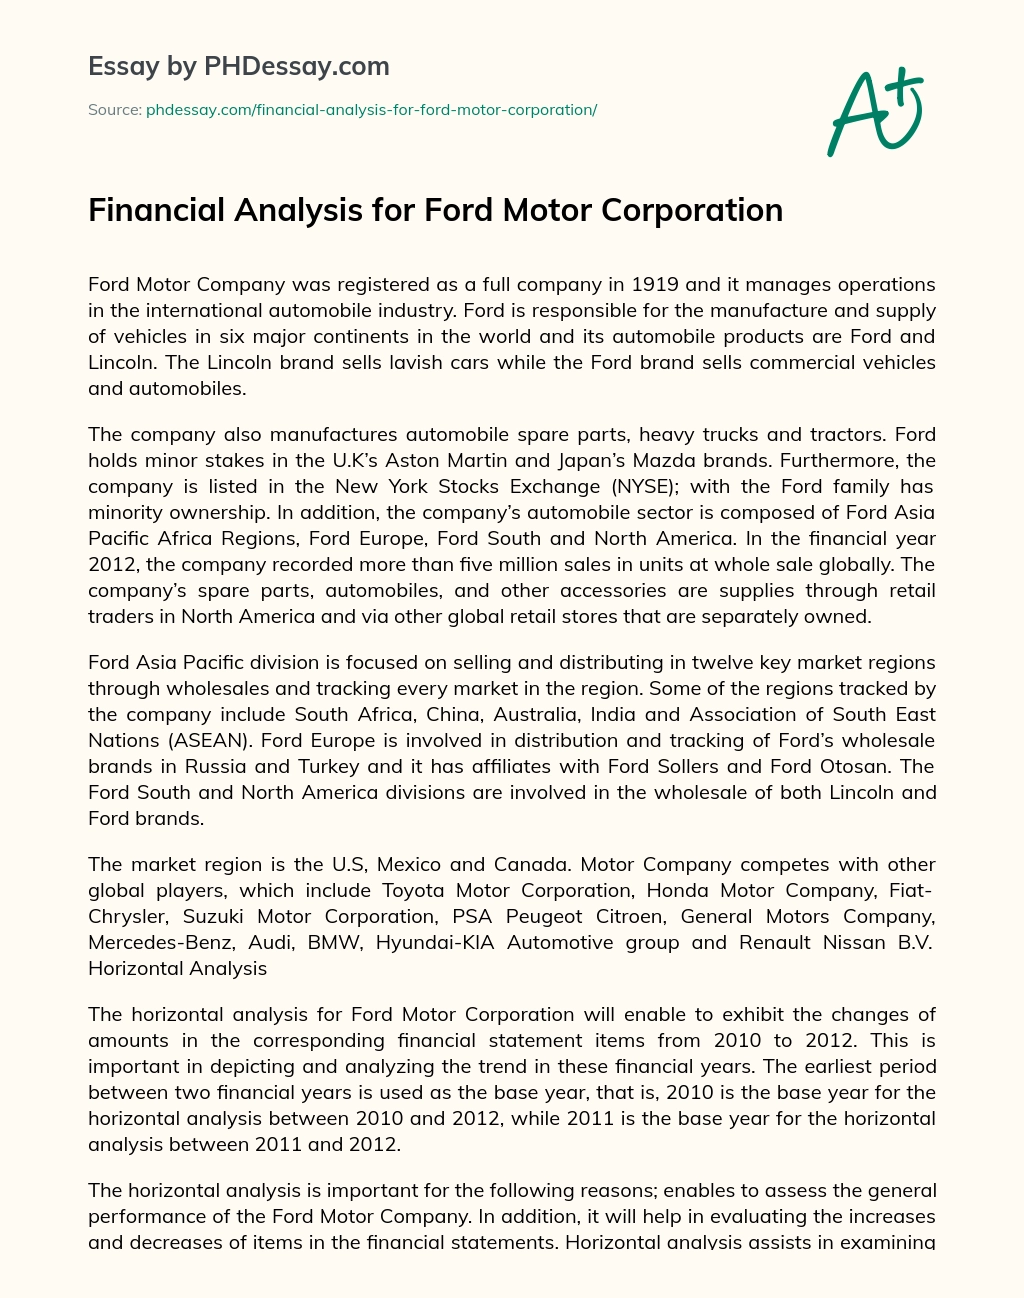 Financial Analysis for Ford Motor Corporation essay